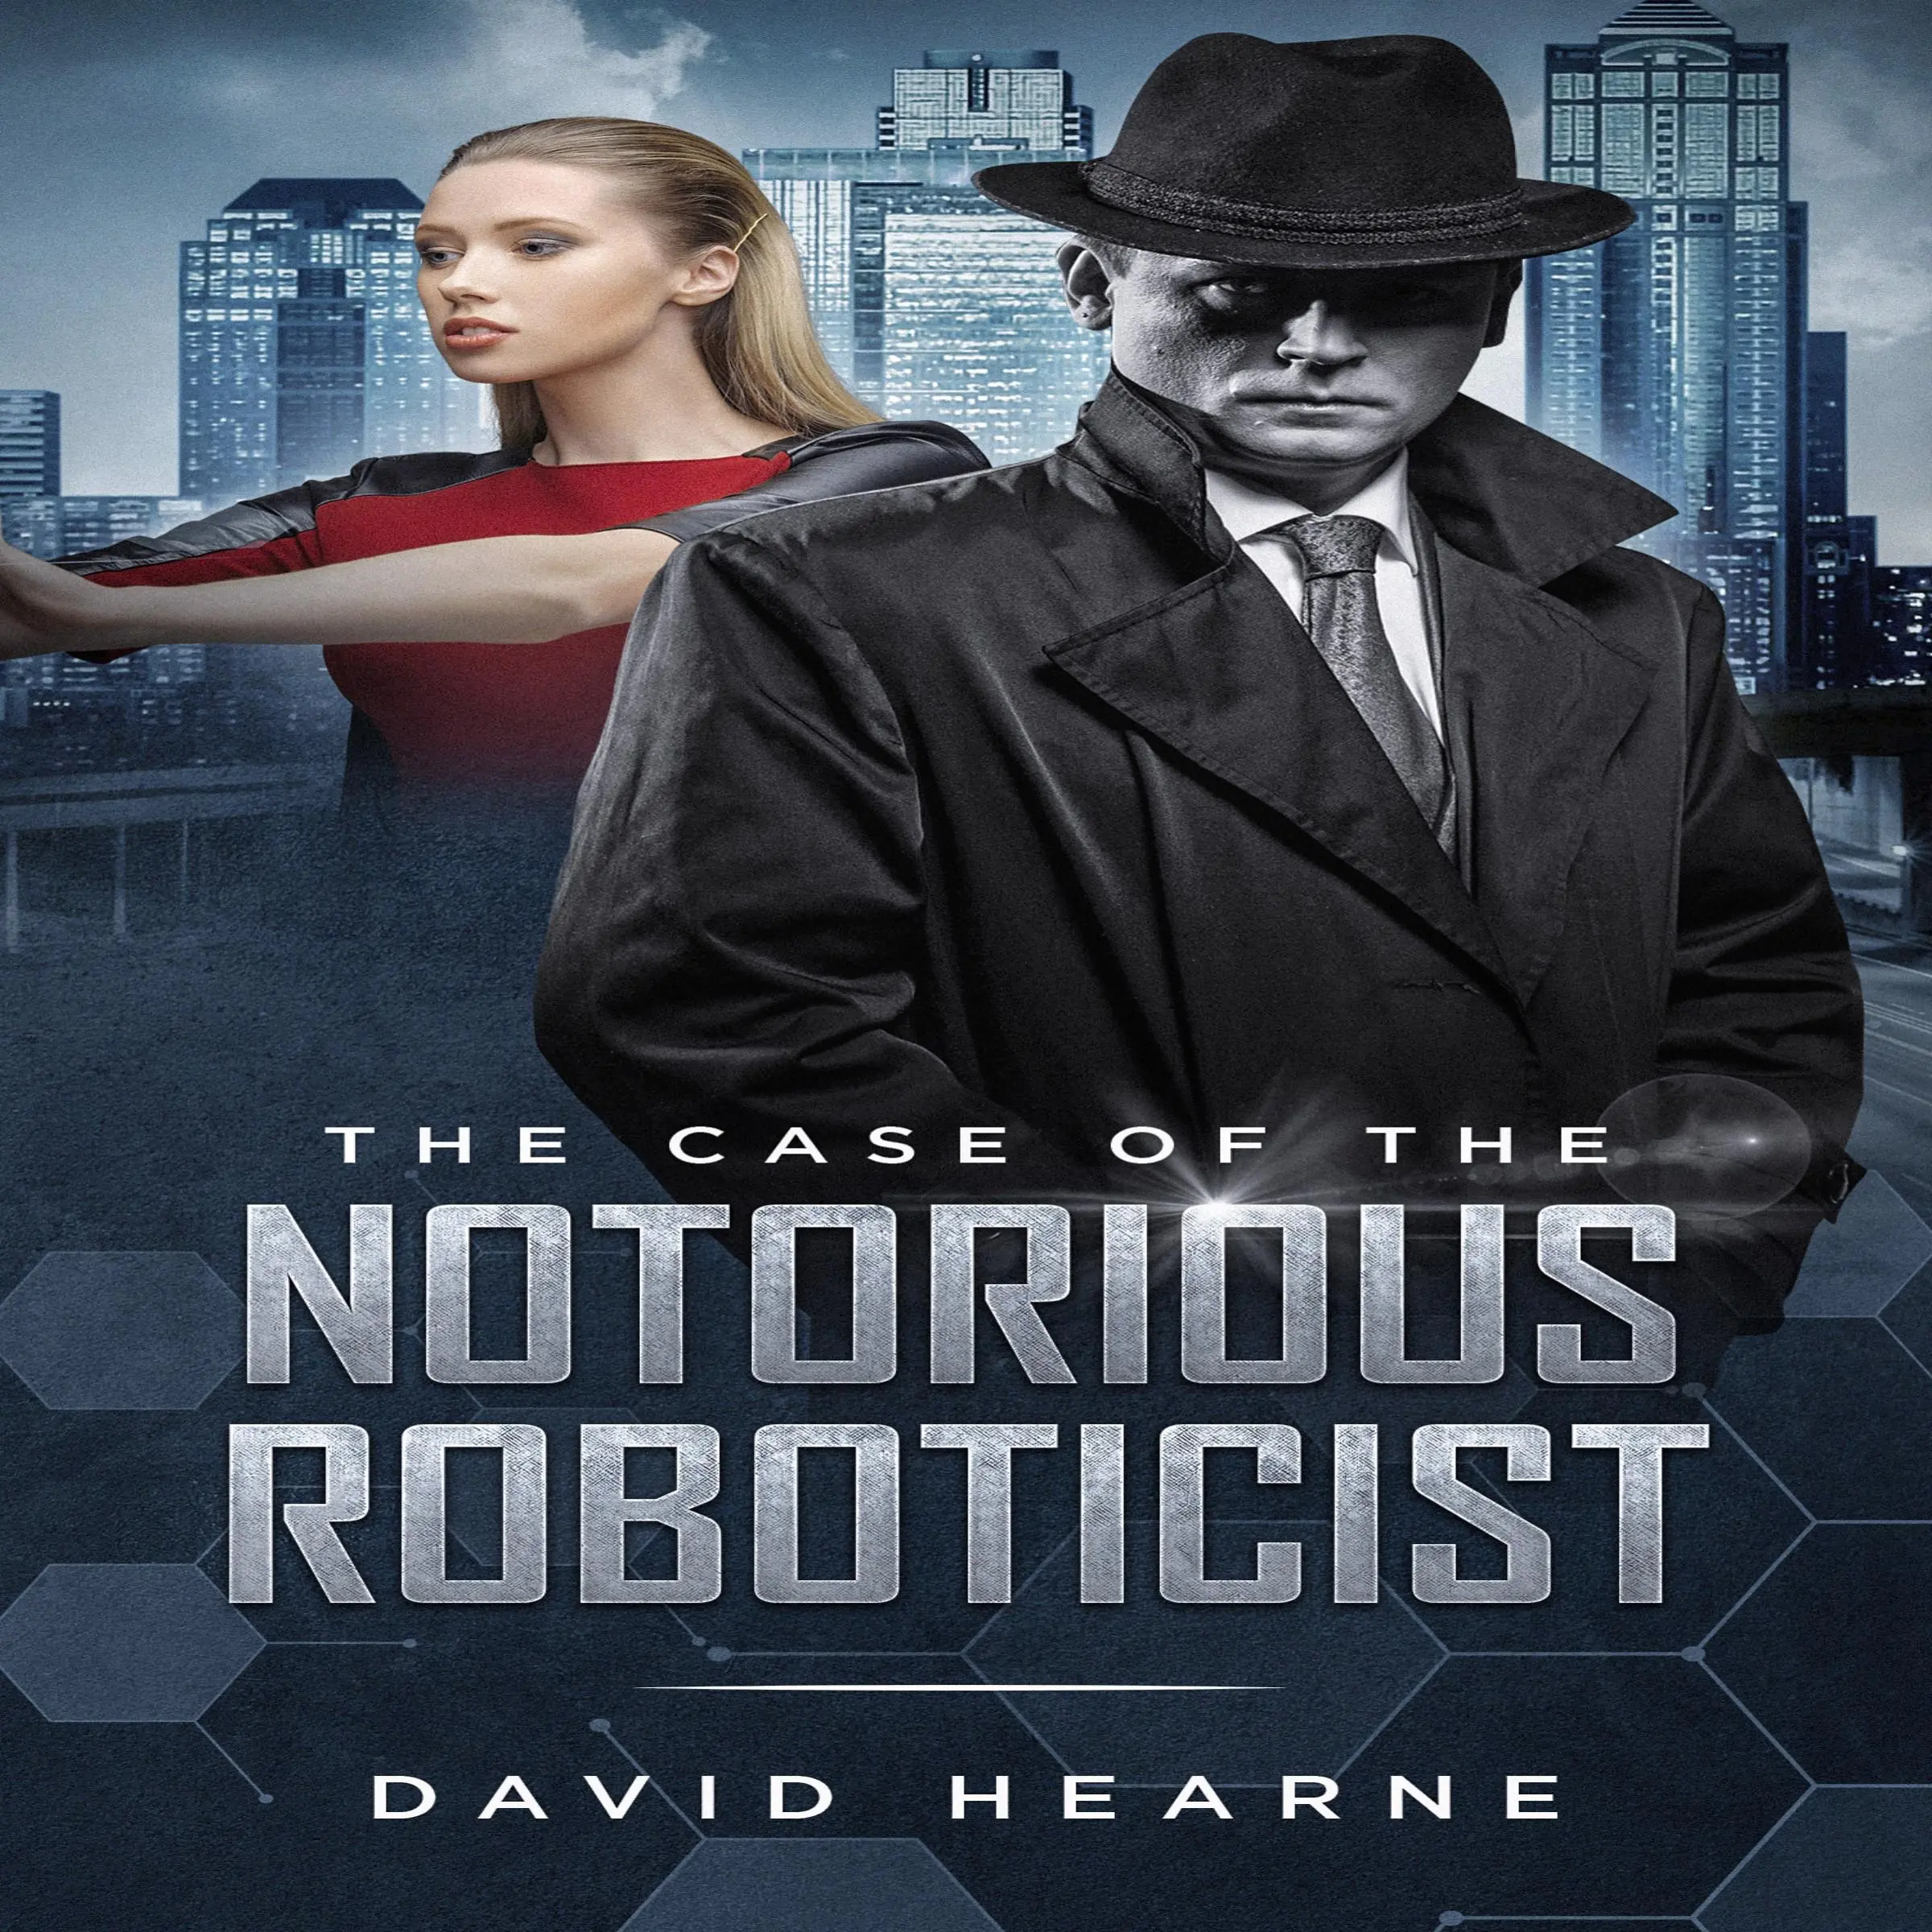 The Case of the Notorious Roboticist by David Hearne Audiobook